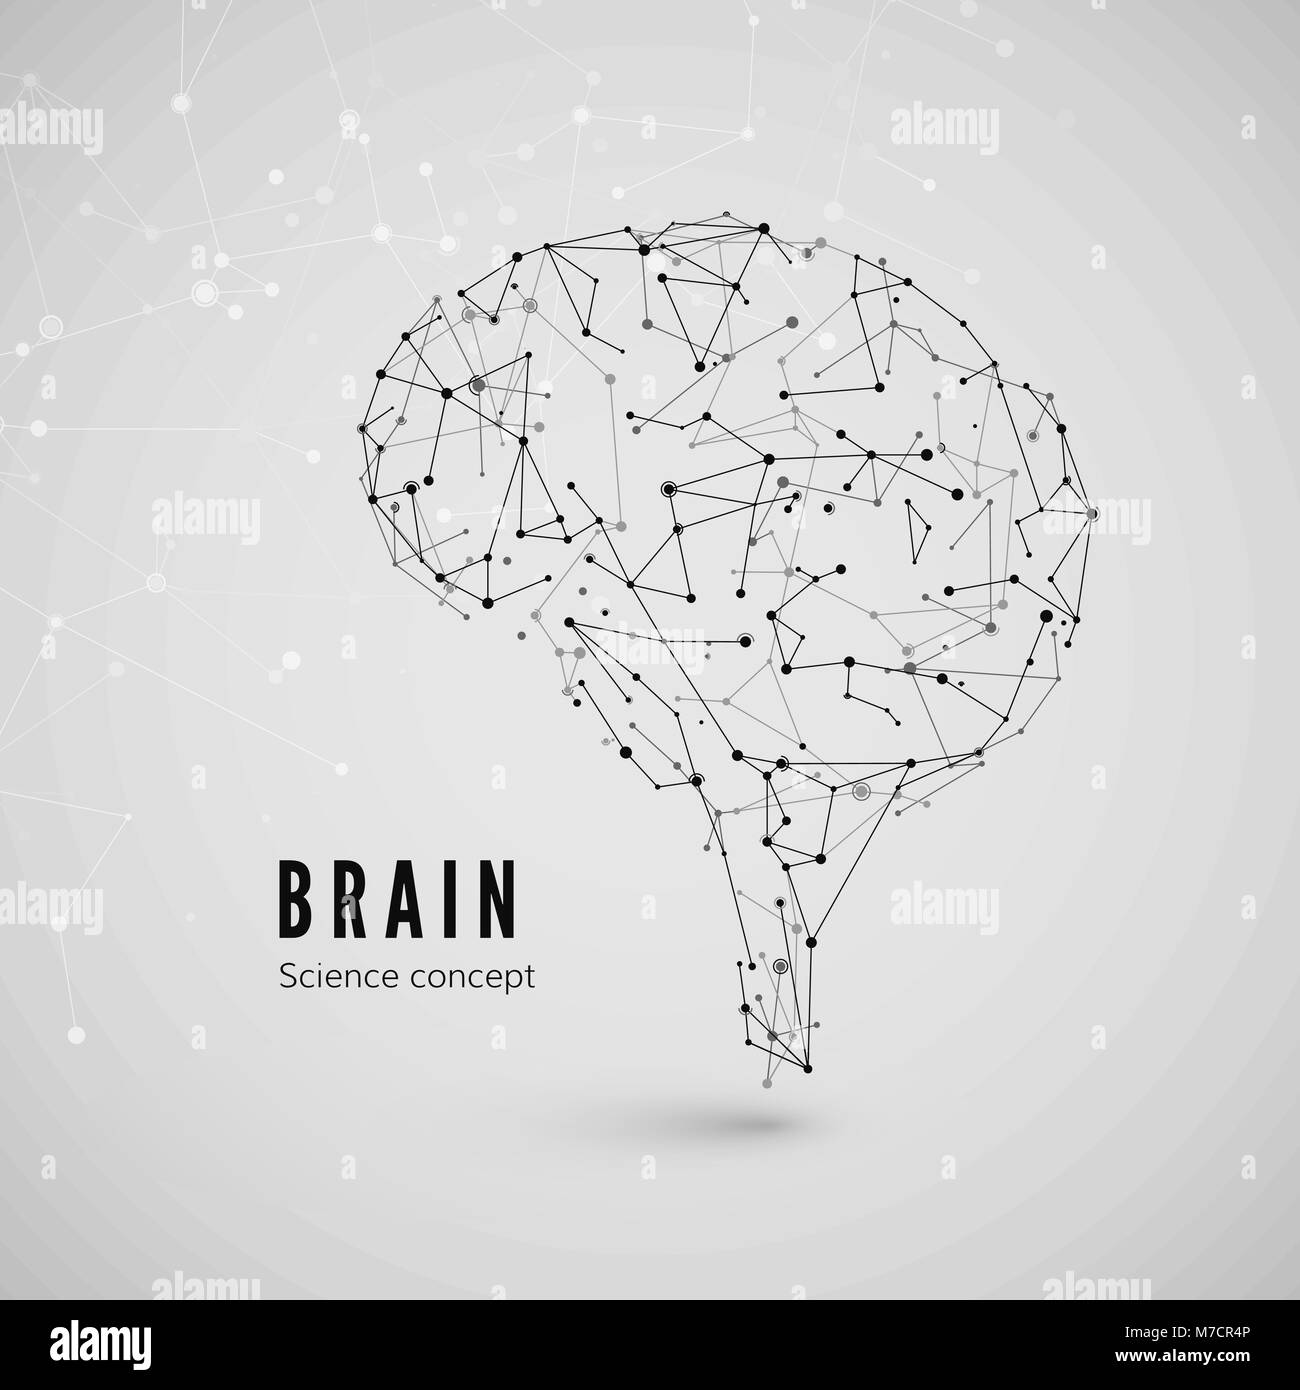 Graphic concept of the brain. Technology and science background. Brain is composed of points, lines and triangles. Vector illustration Stock Vector